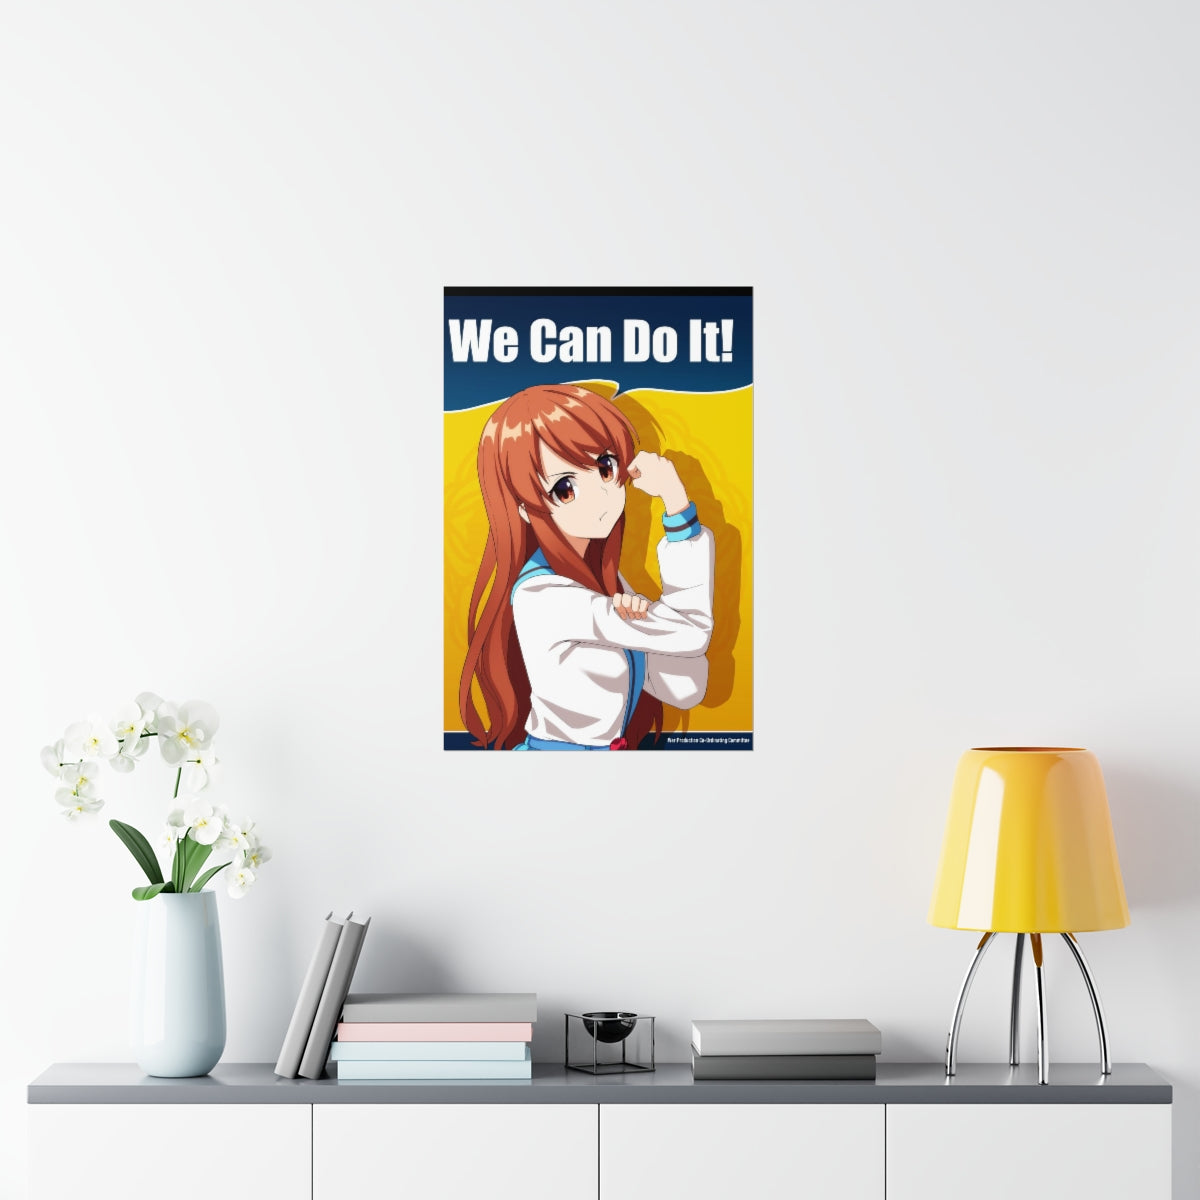 We can do it! Poster